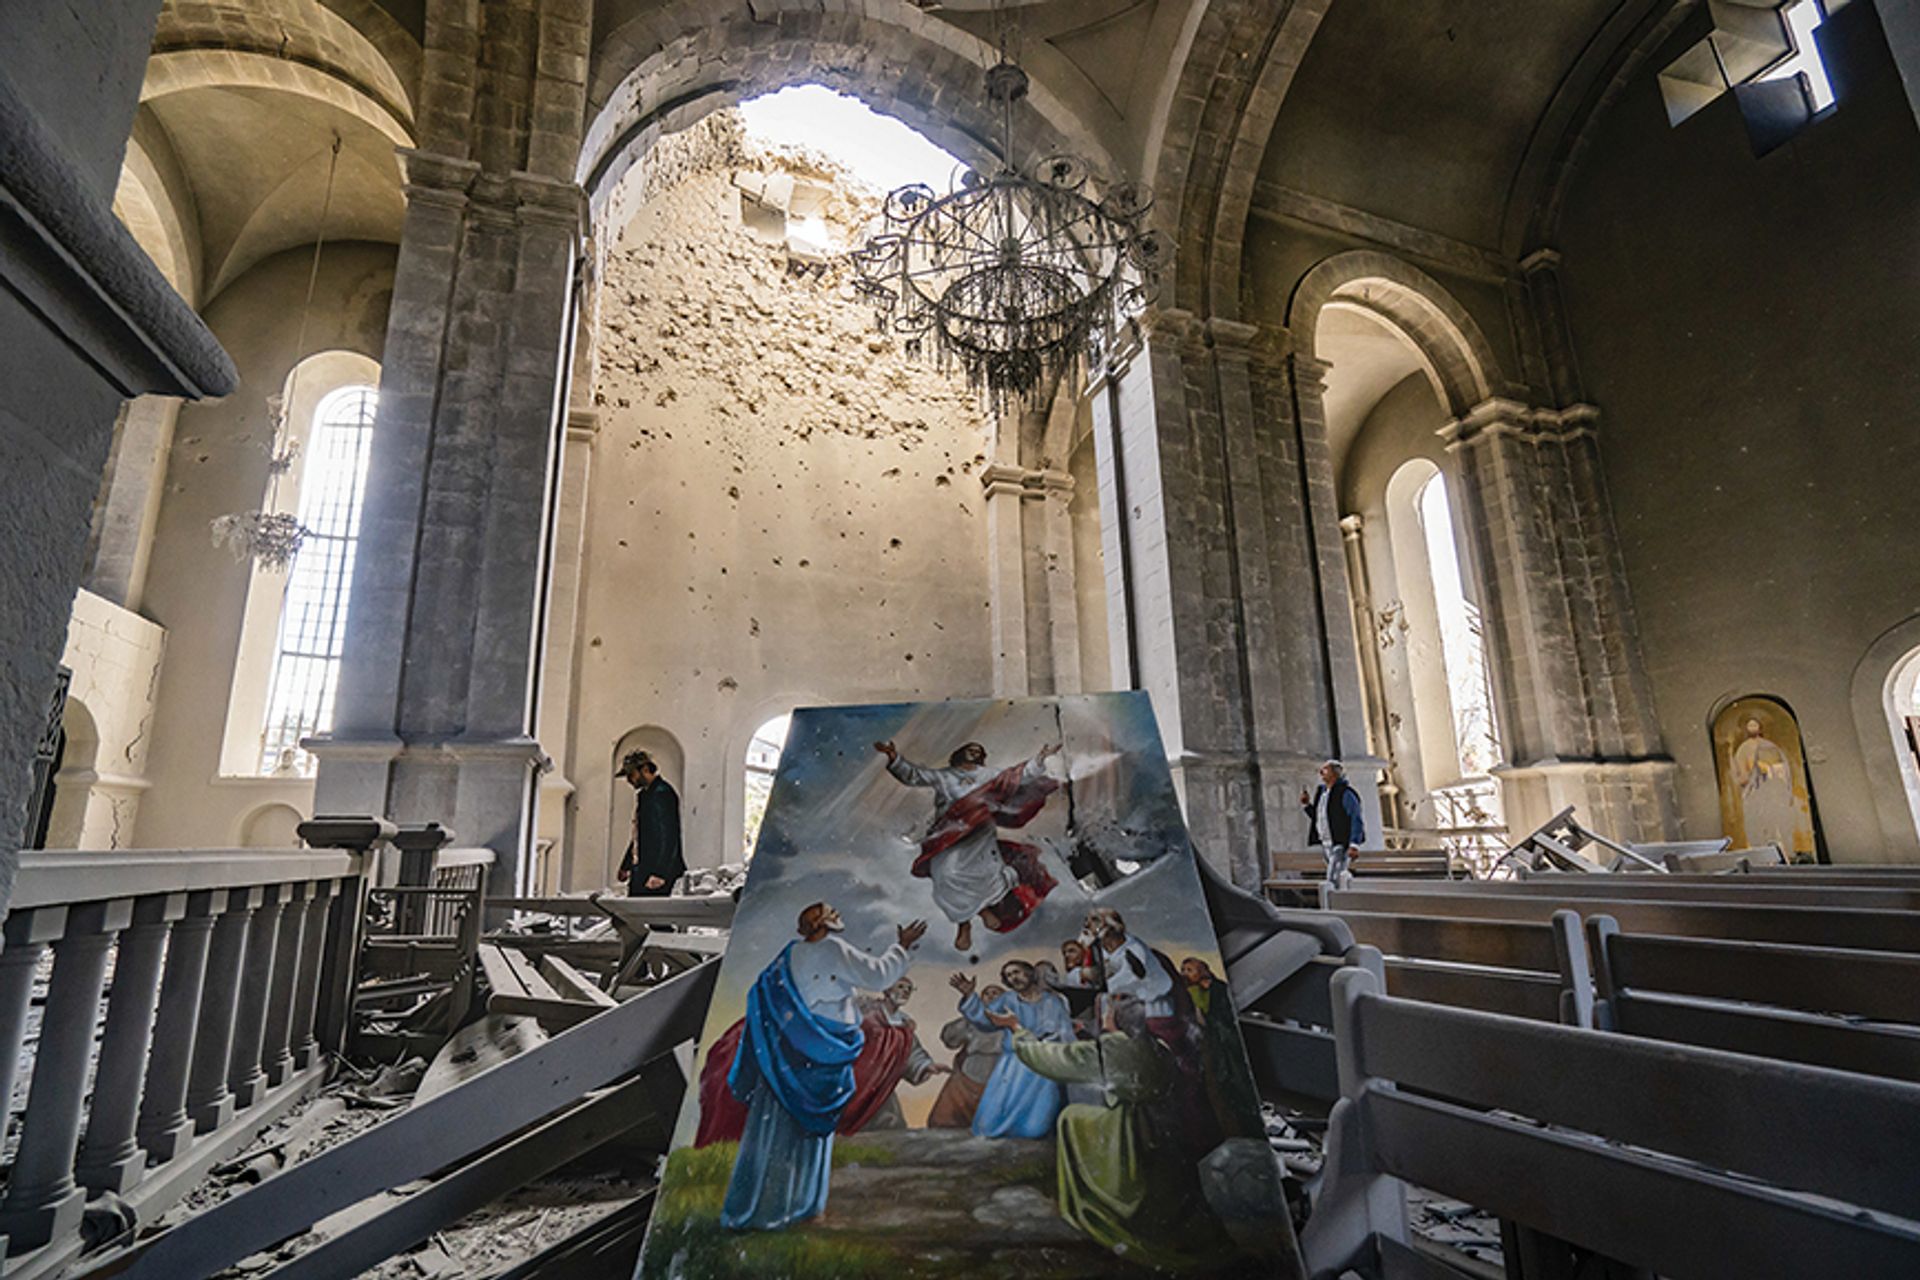 Armenia has accused Azerbaijan military of shelling the Ghazanchetsots Holy Saviour Cathedral in Shushi, one of the largest Armenian churches in the world Photo: Celestino Arce/NurPhoto via Getty Images